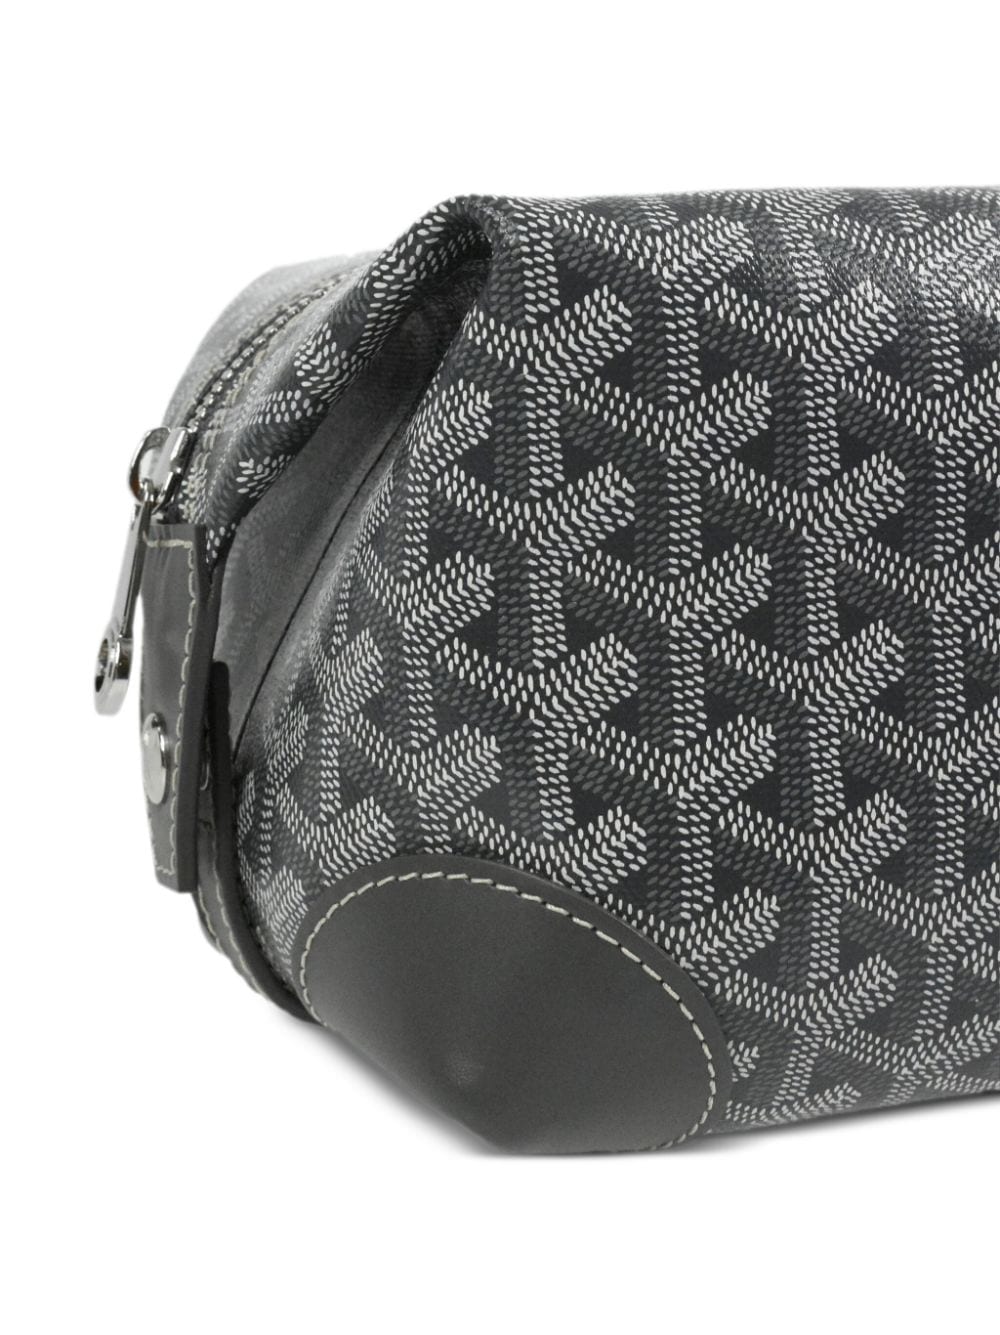 GOYARD Boeing 25 Clutch Bag Pouch Gray Silver PVC Unisex Used F/S From  Japan